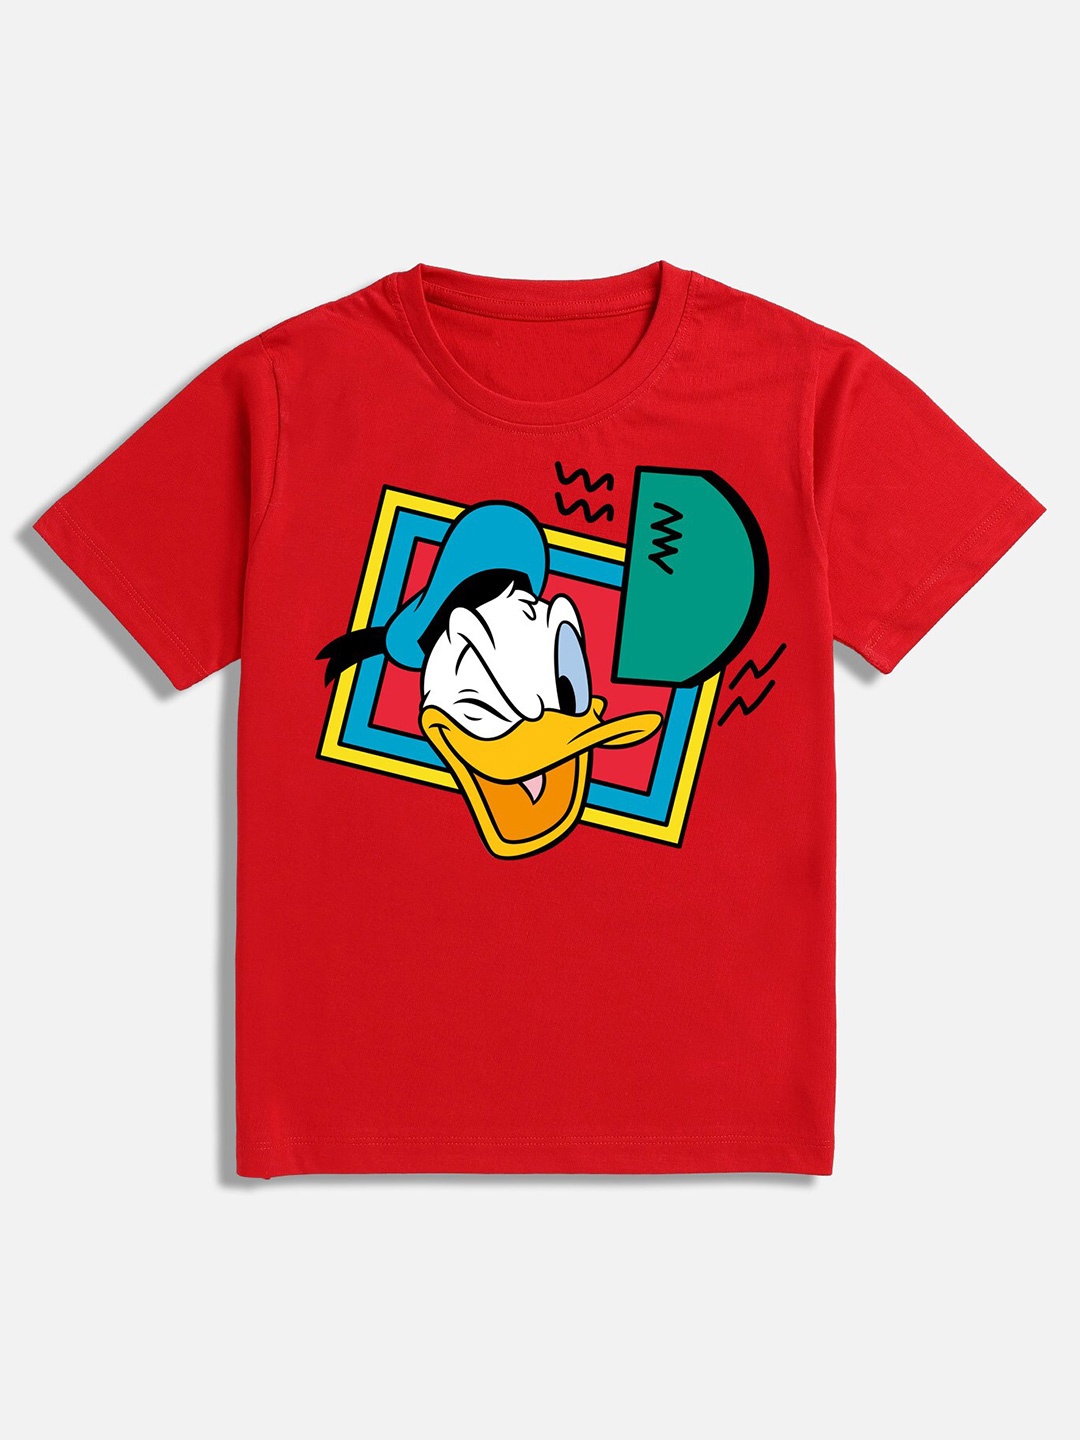 

BAESD Boys Donald Duck Printed Cotton T-shirt, Red